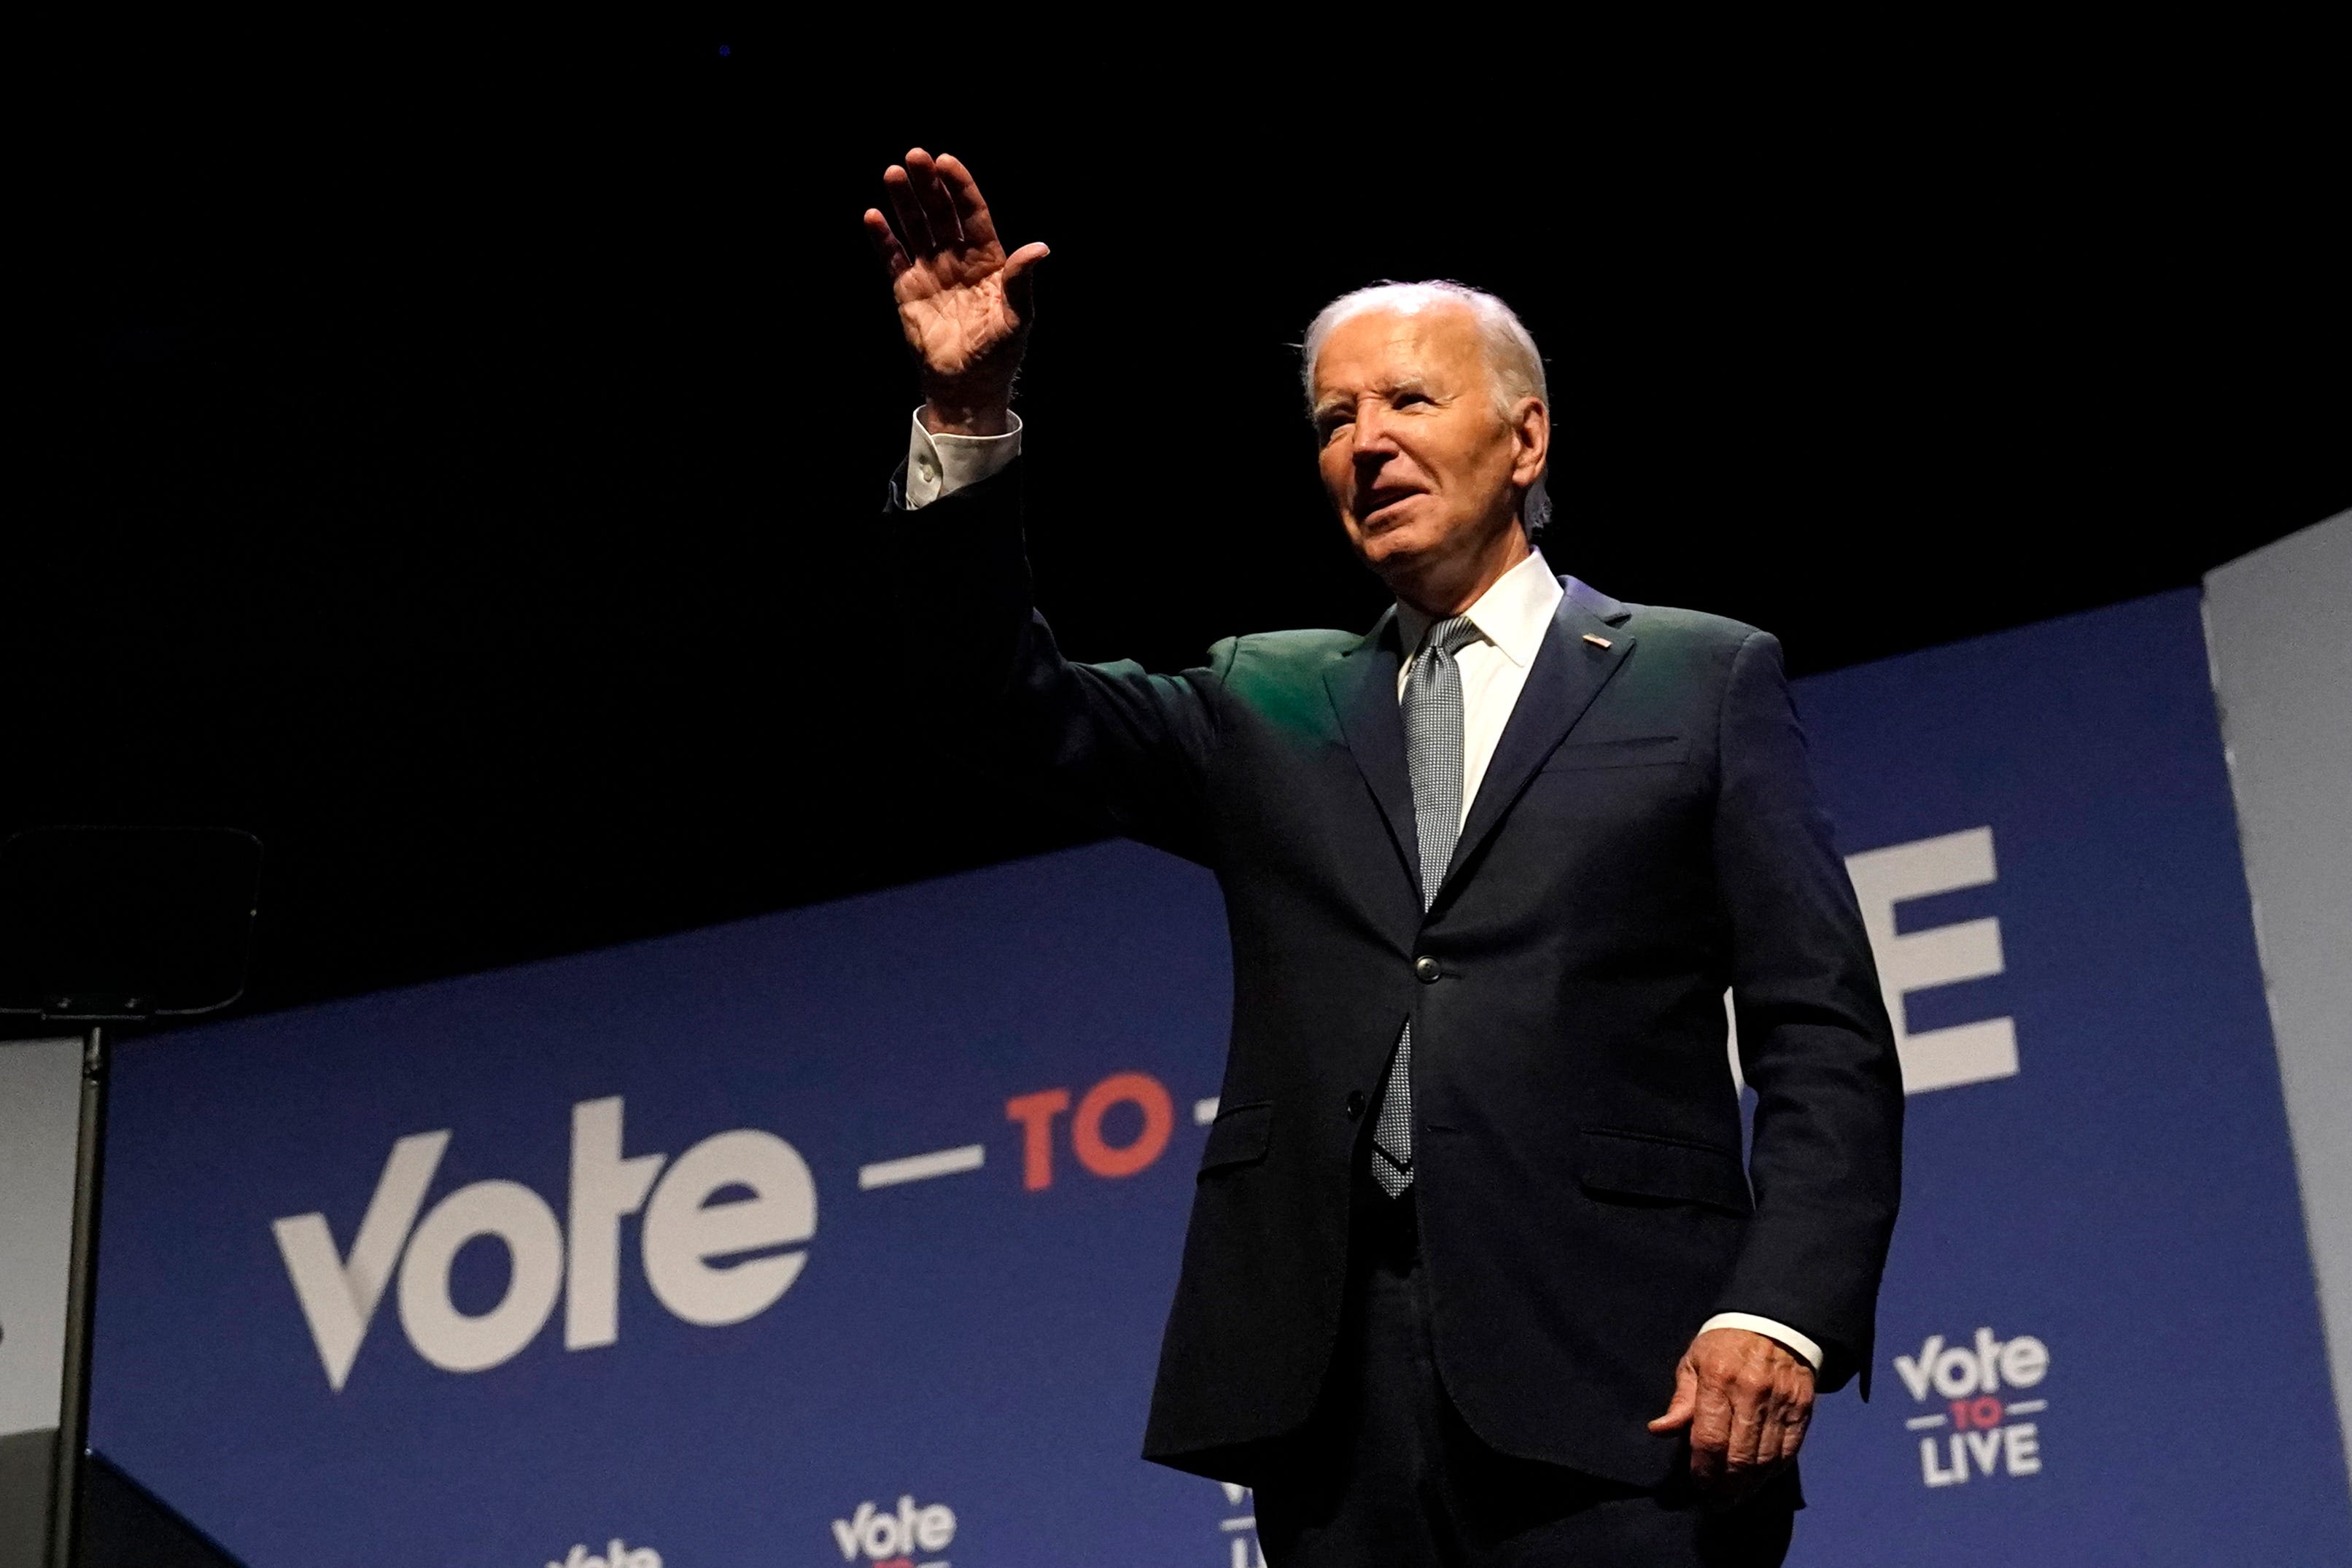 Democrats to hold off on early nomination of President Biden this month amid party outcry